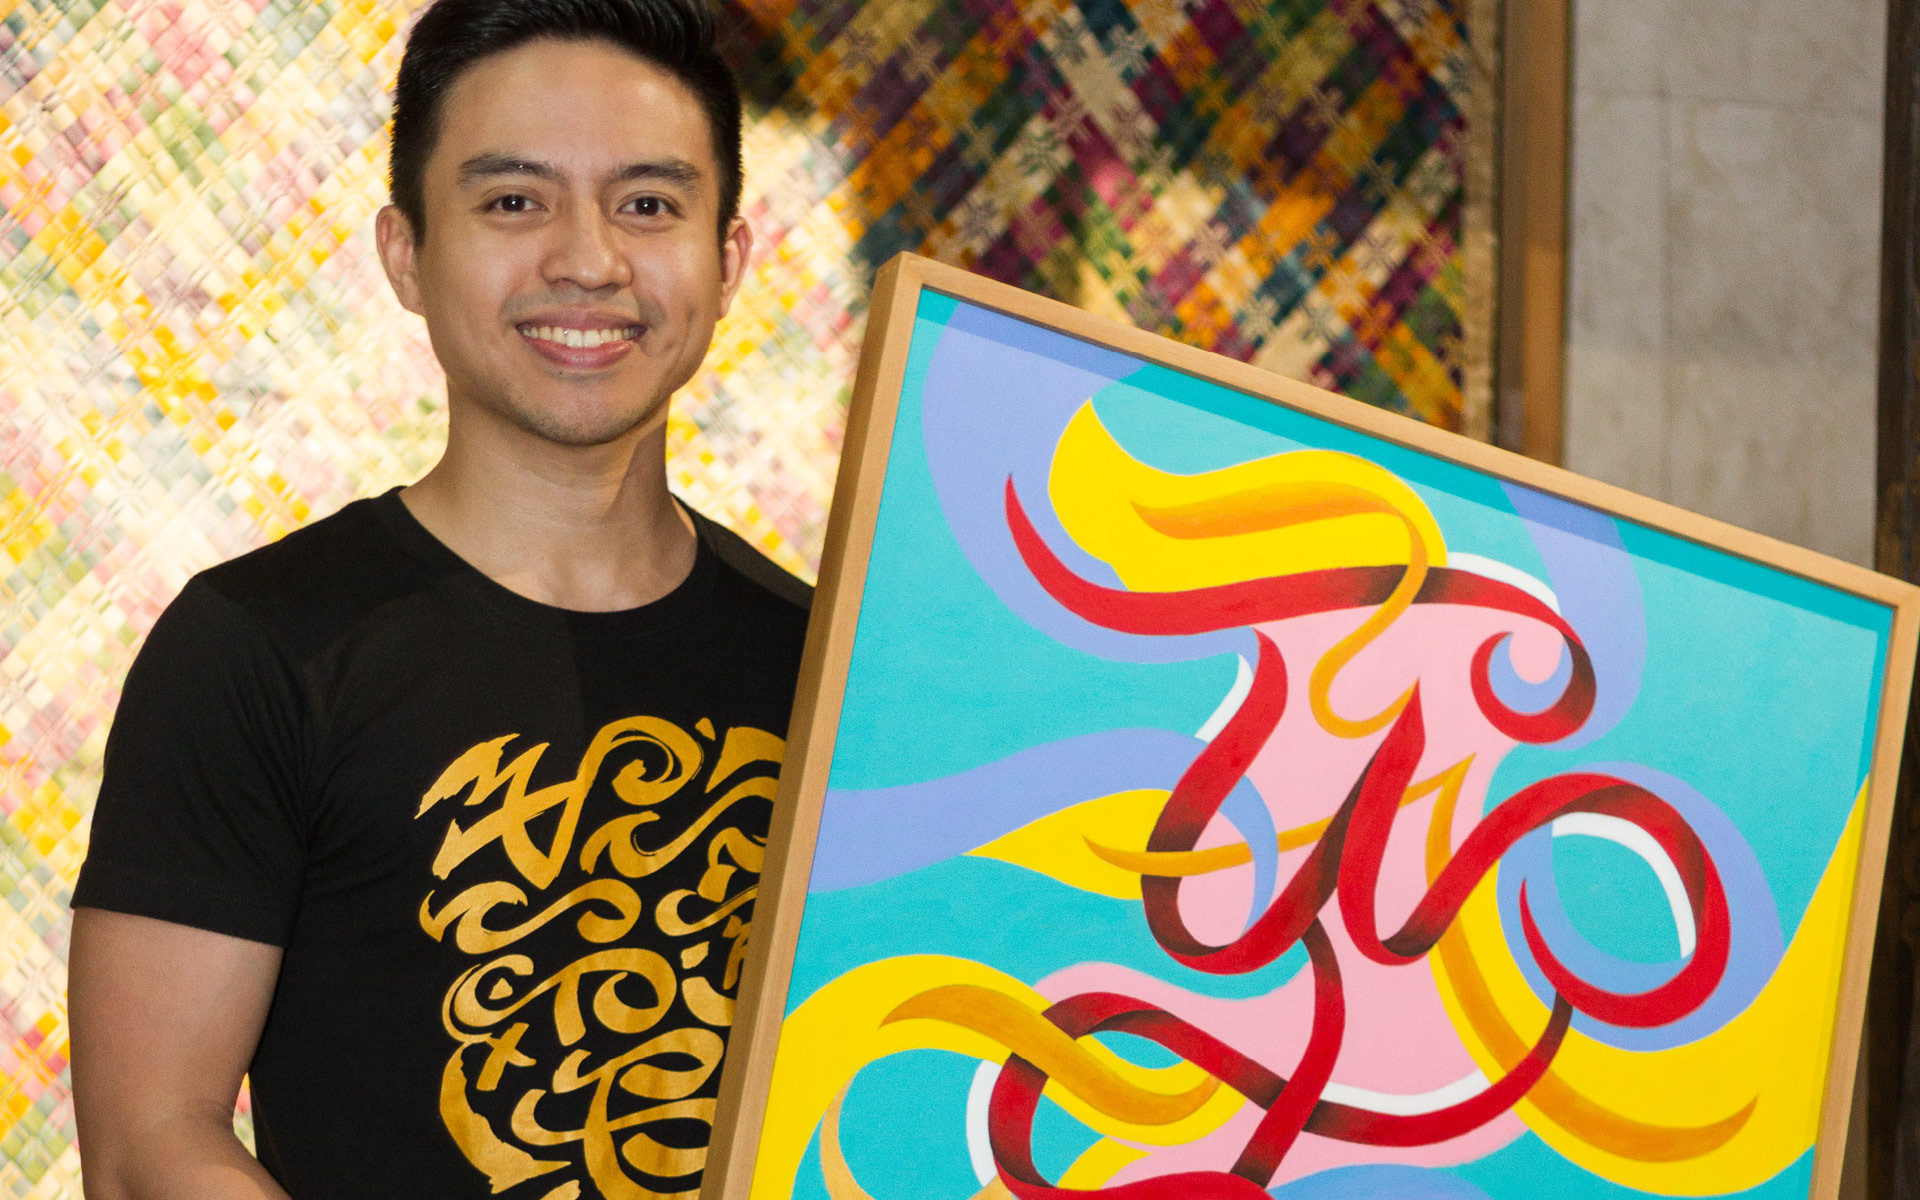 A smiling young man holds a 2 x 4' painting of a stylized script. The background is turquoise blue and the script is in pink, yello, red, and purple swirls.